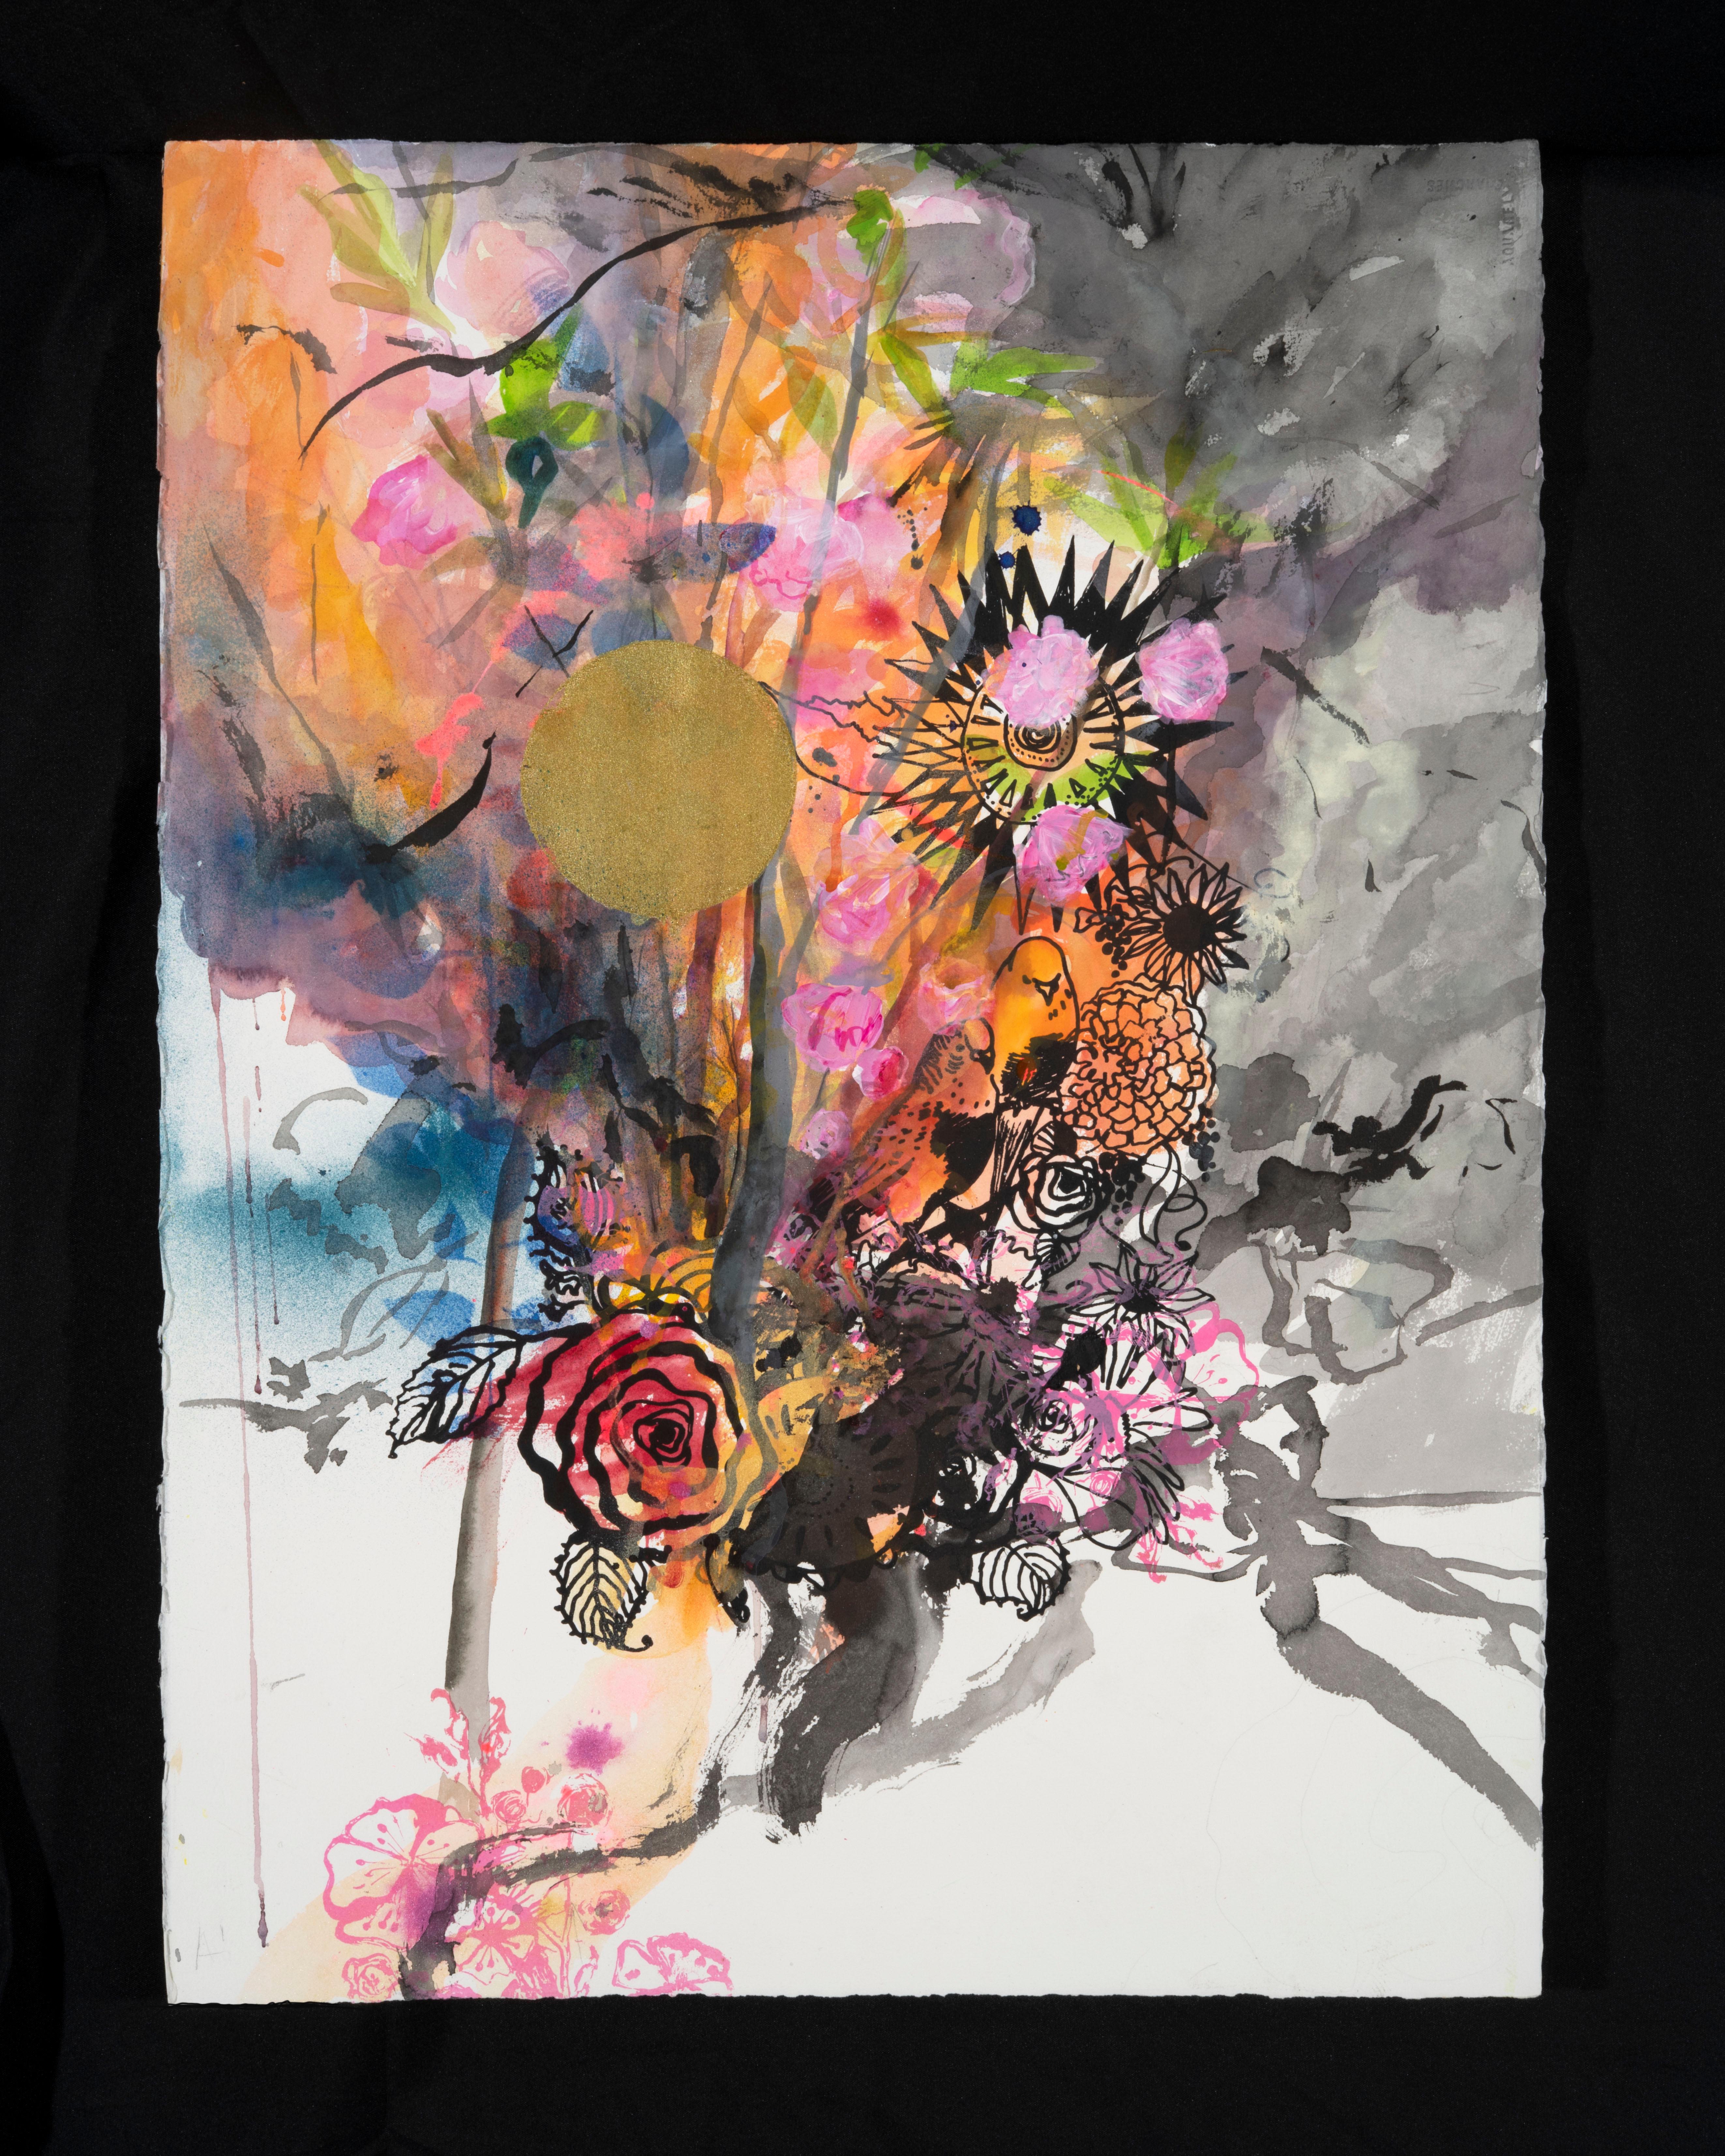 Botanical Painting Ode to Angelo - Malibu - Contemporary Mixed Media Art by Maryanne Pollock